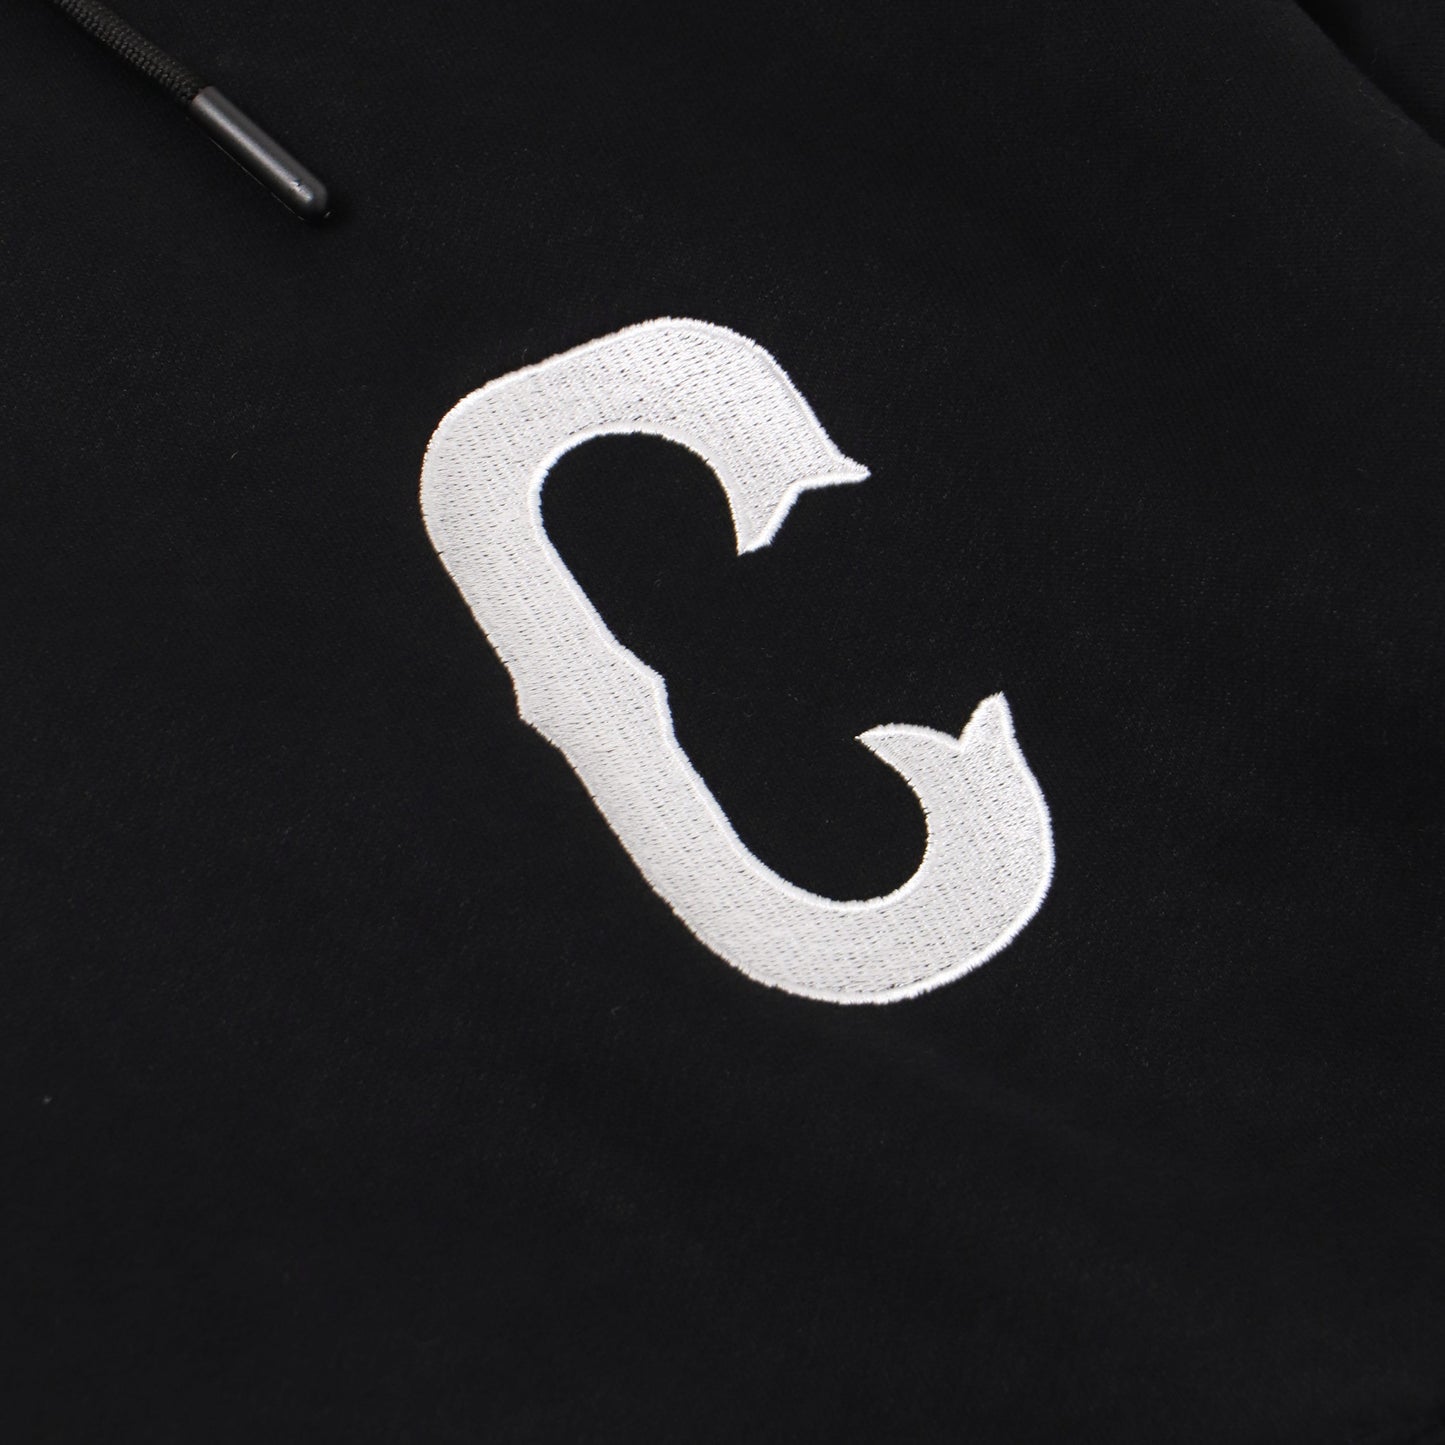 CH CALIFORNIA SPECIAL HOODIE